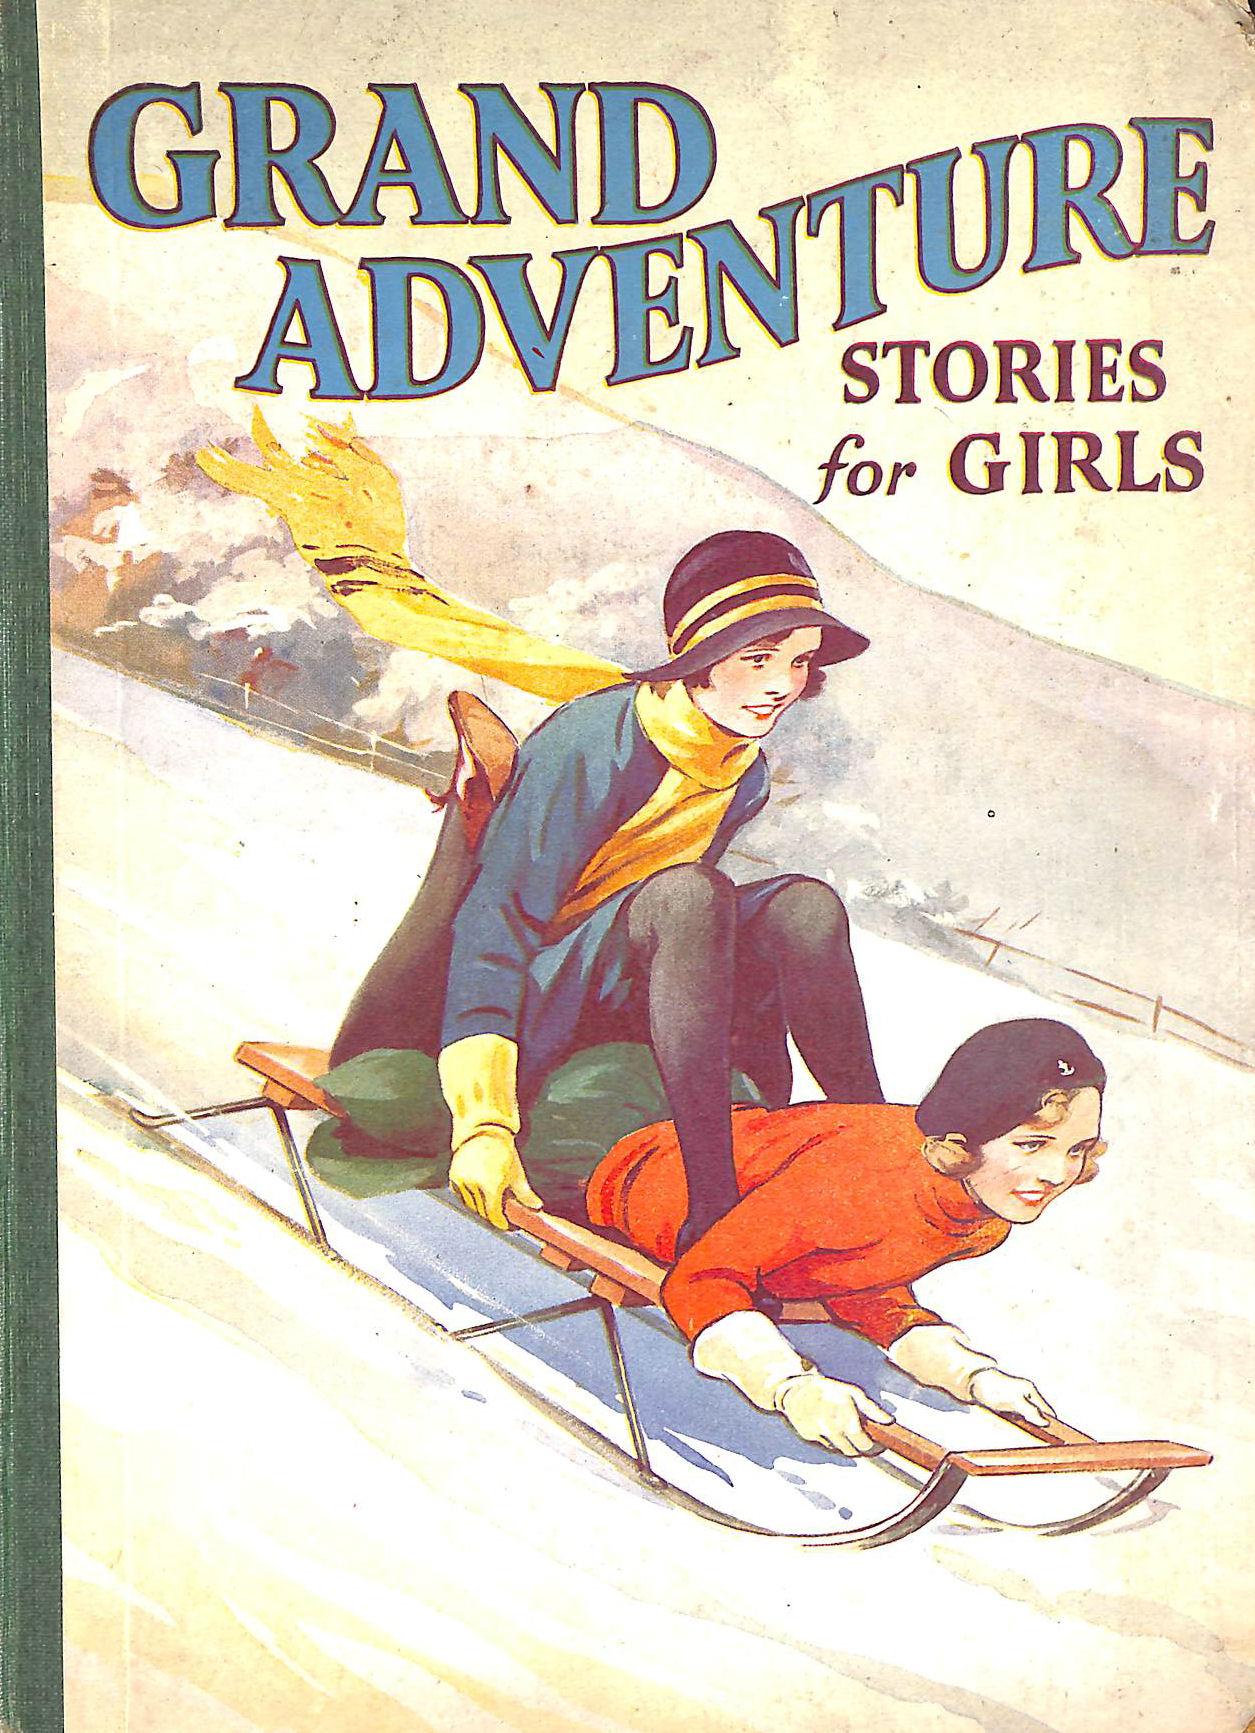 NO STATED AUTHOR - Grand Adventure Stories For Girls